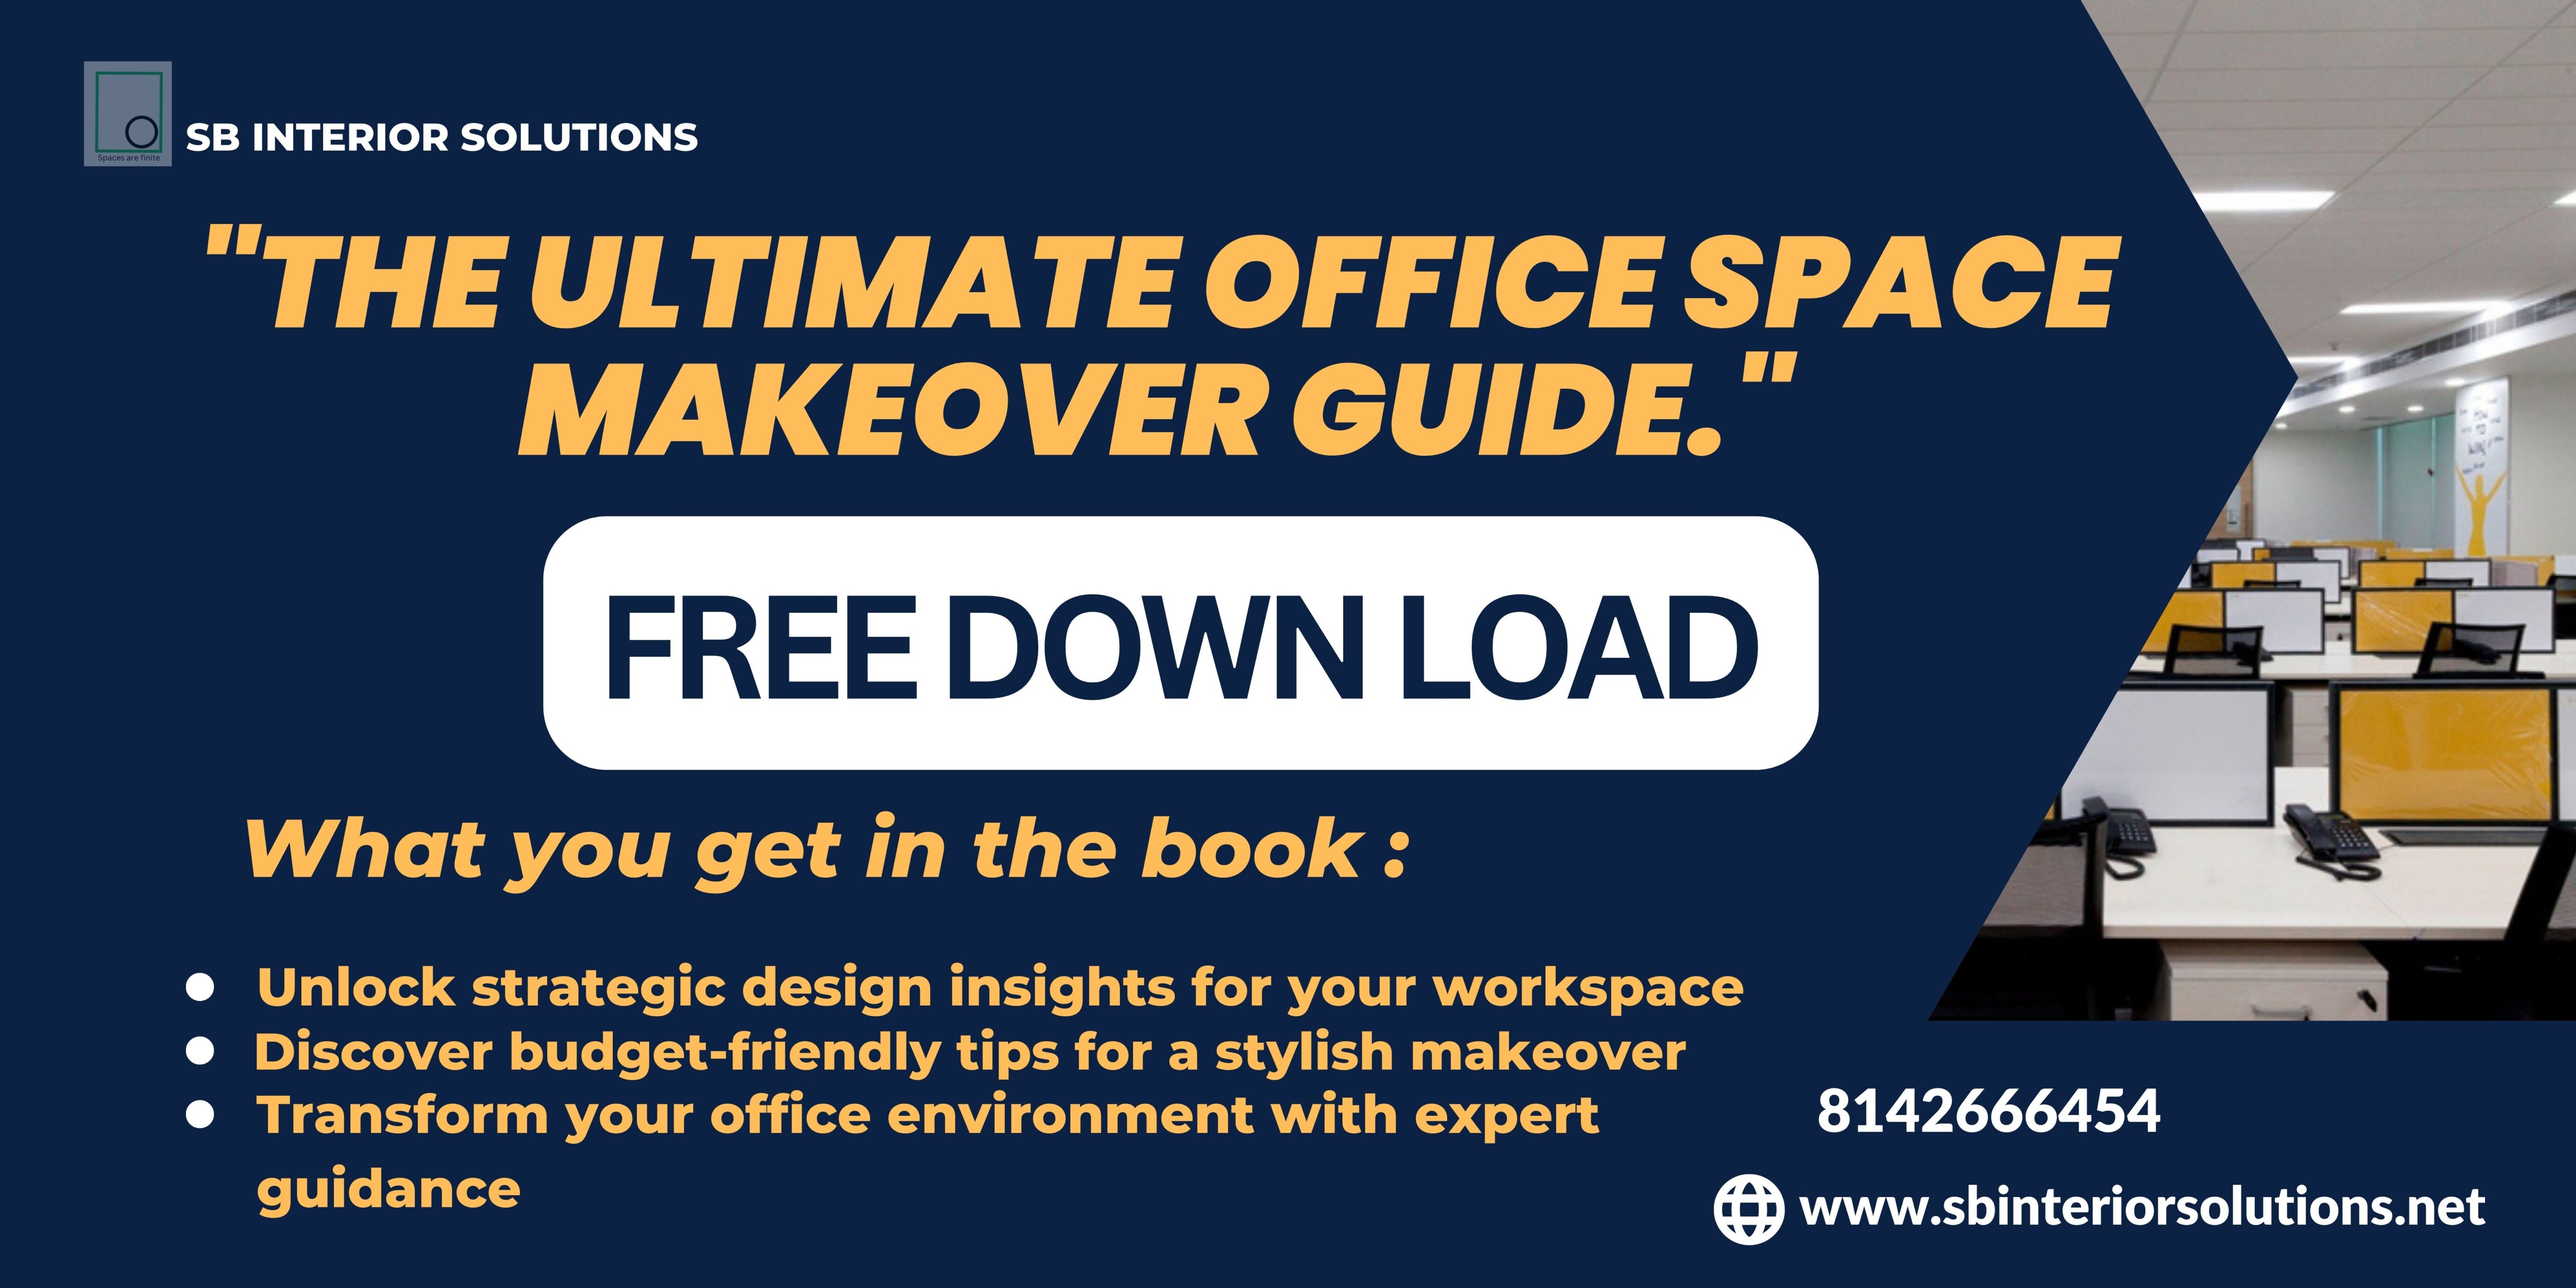 The Ultimate Office Space Makeover Guide